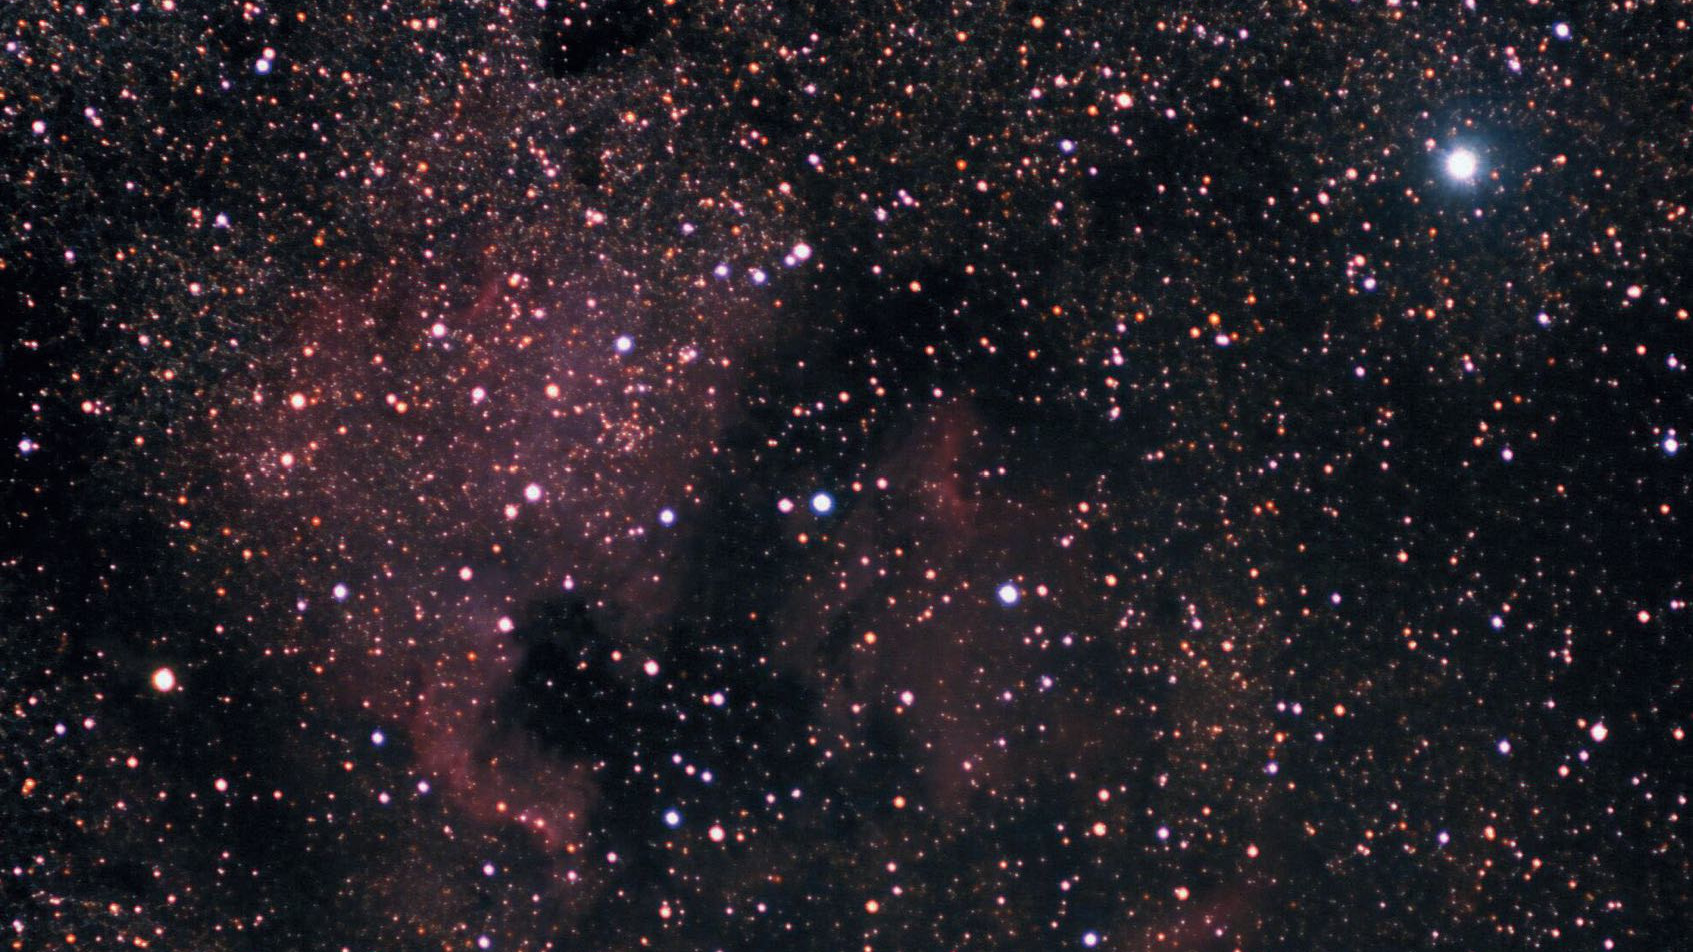 South-east of Deneb (the bright star at the top right) you will find NGC 7000, the North America Nebula, one of the most beautiful emission nebulae. The Little Orion asterism can be seen to the left of the centre of the image, or to the east of the Gulf of Mexico. 
Marcus Degenkolbe